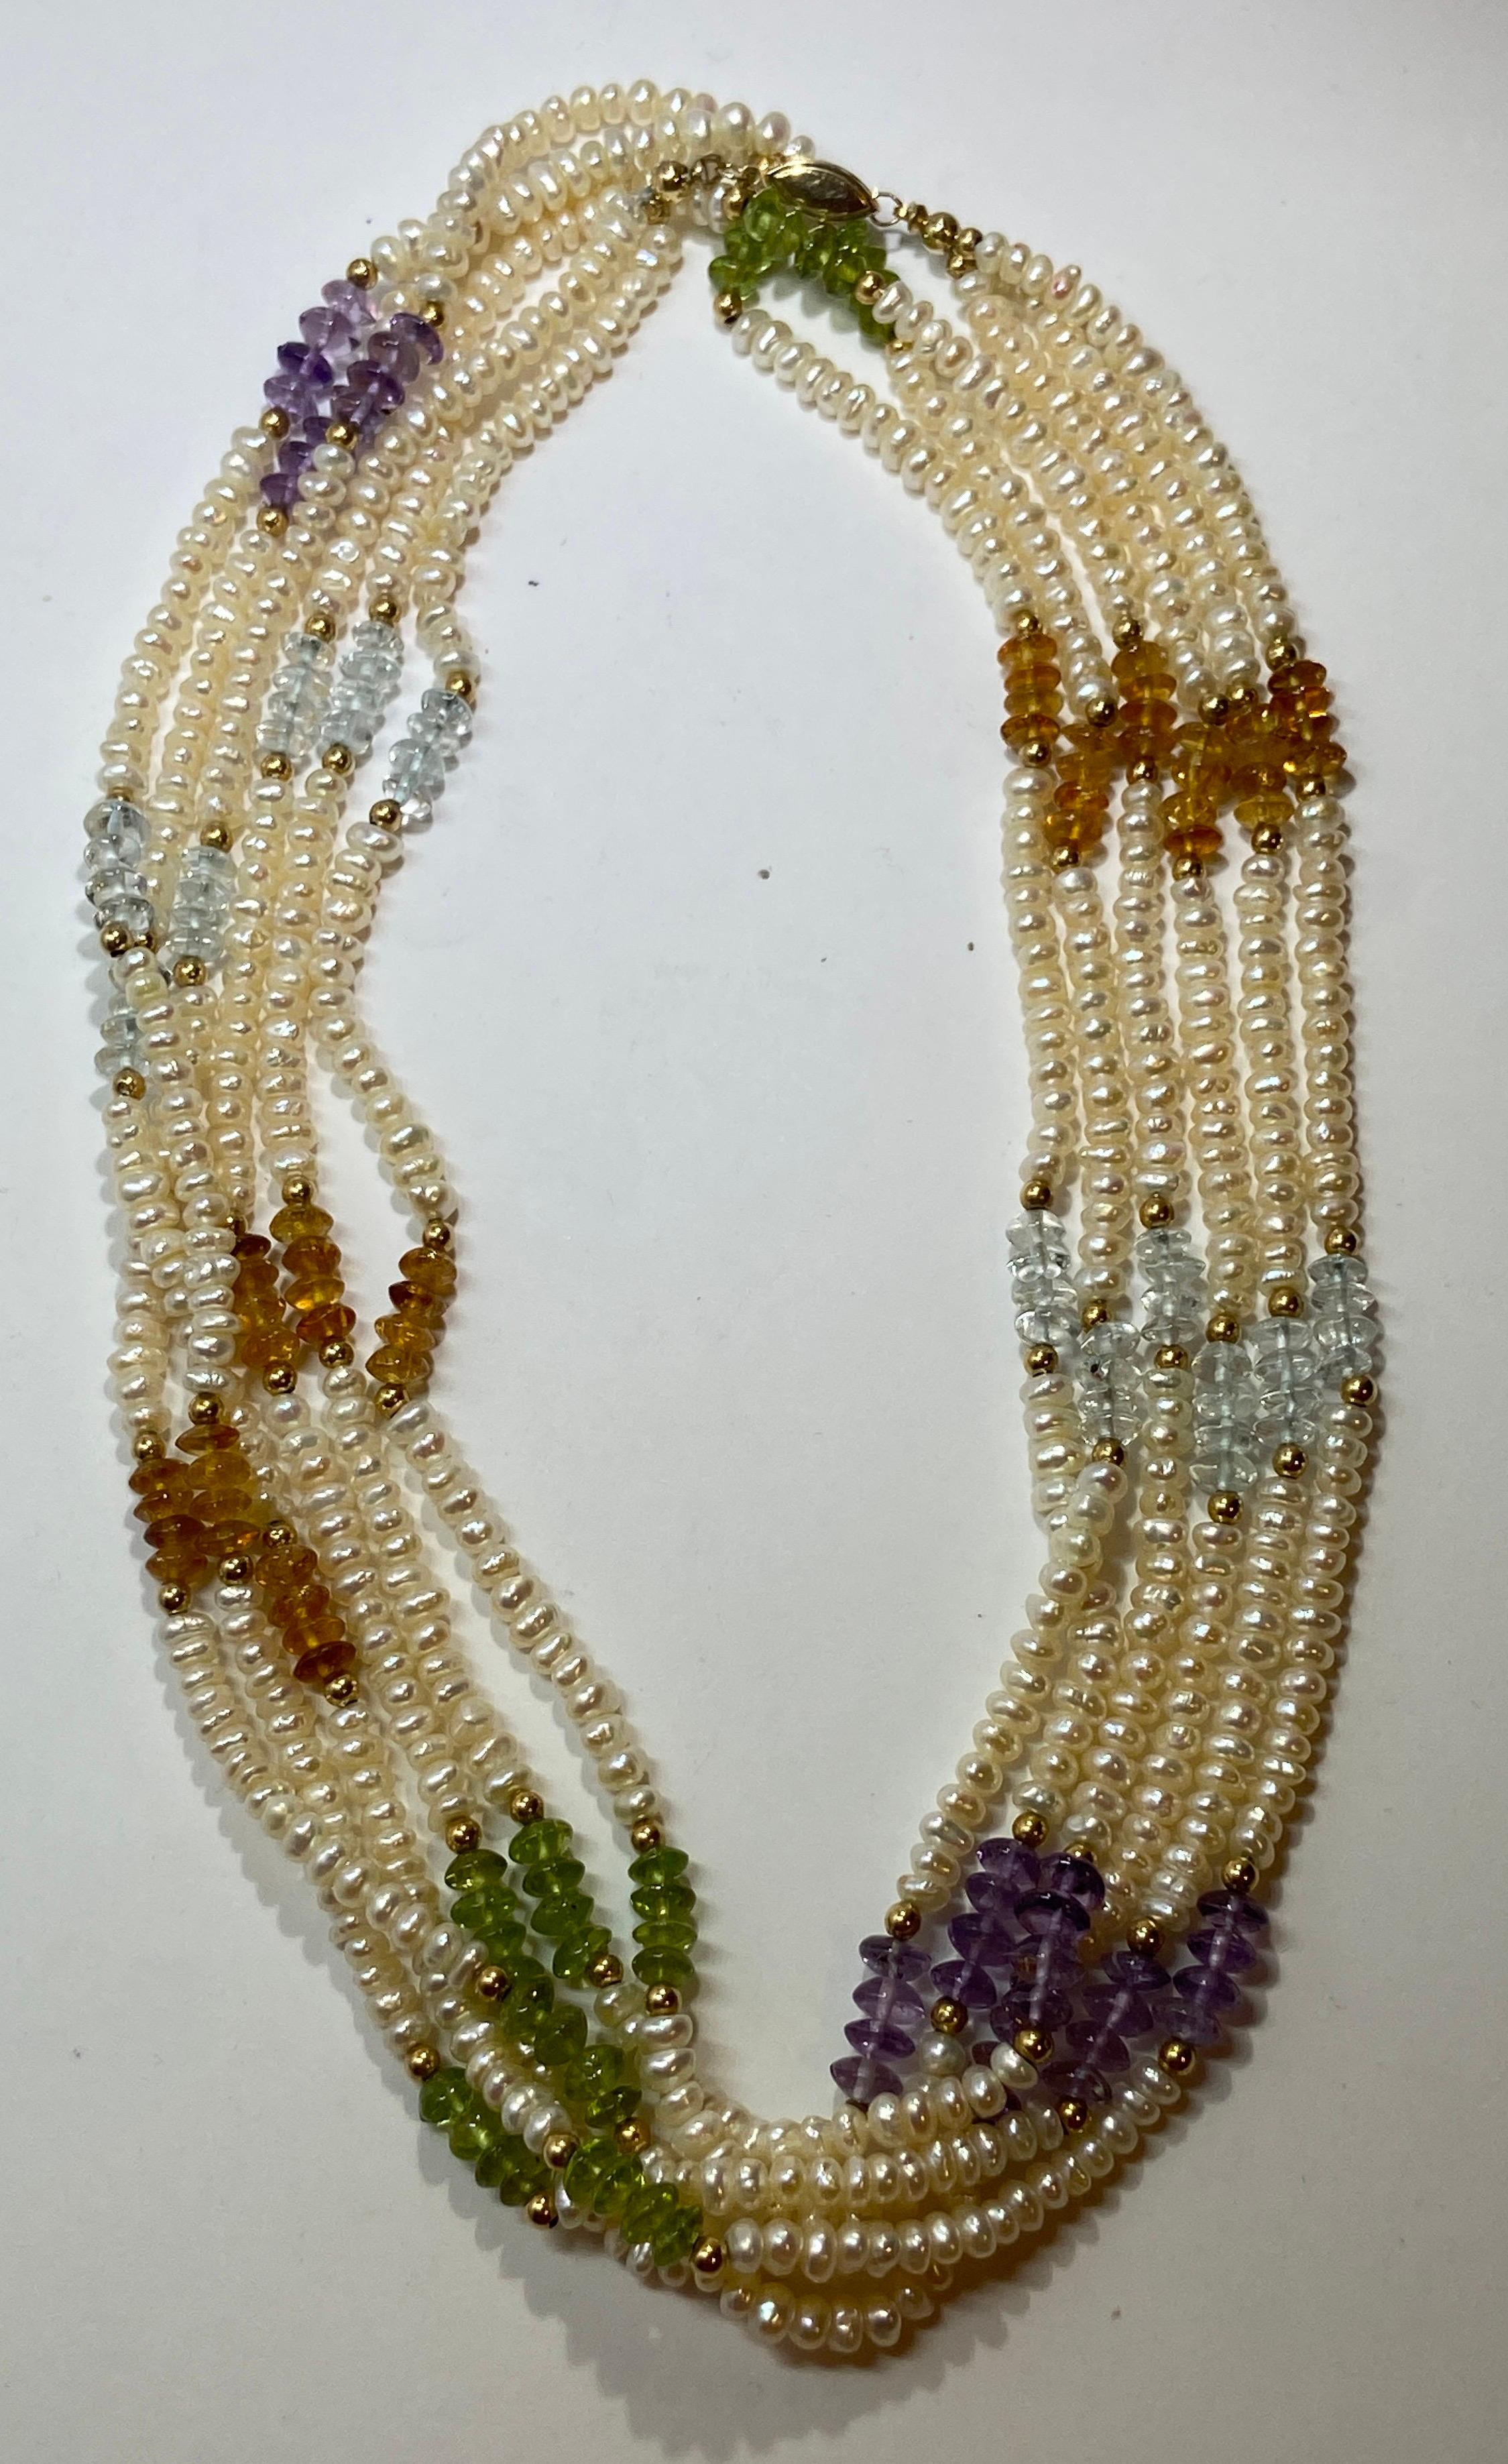 Wonderfully elegant triple-strand freshwater pearls accented with semi-precious stones and highlighted with micro gold hardware necklace measures 34 inches in total. The clasp is of gold hardware. Made in US.